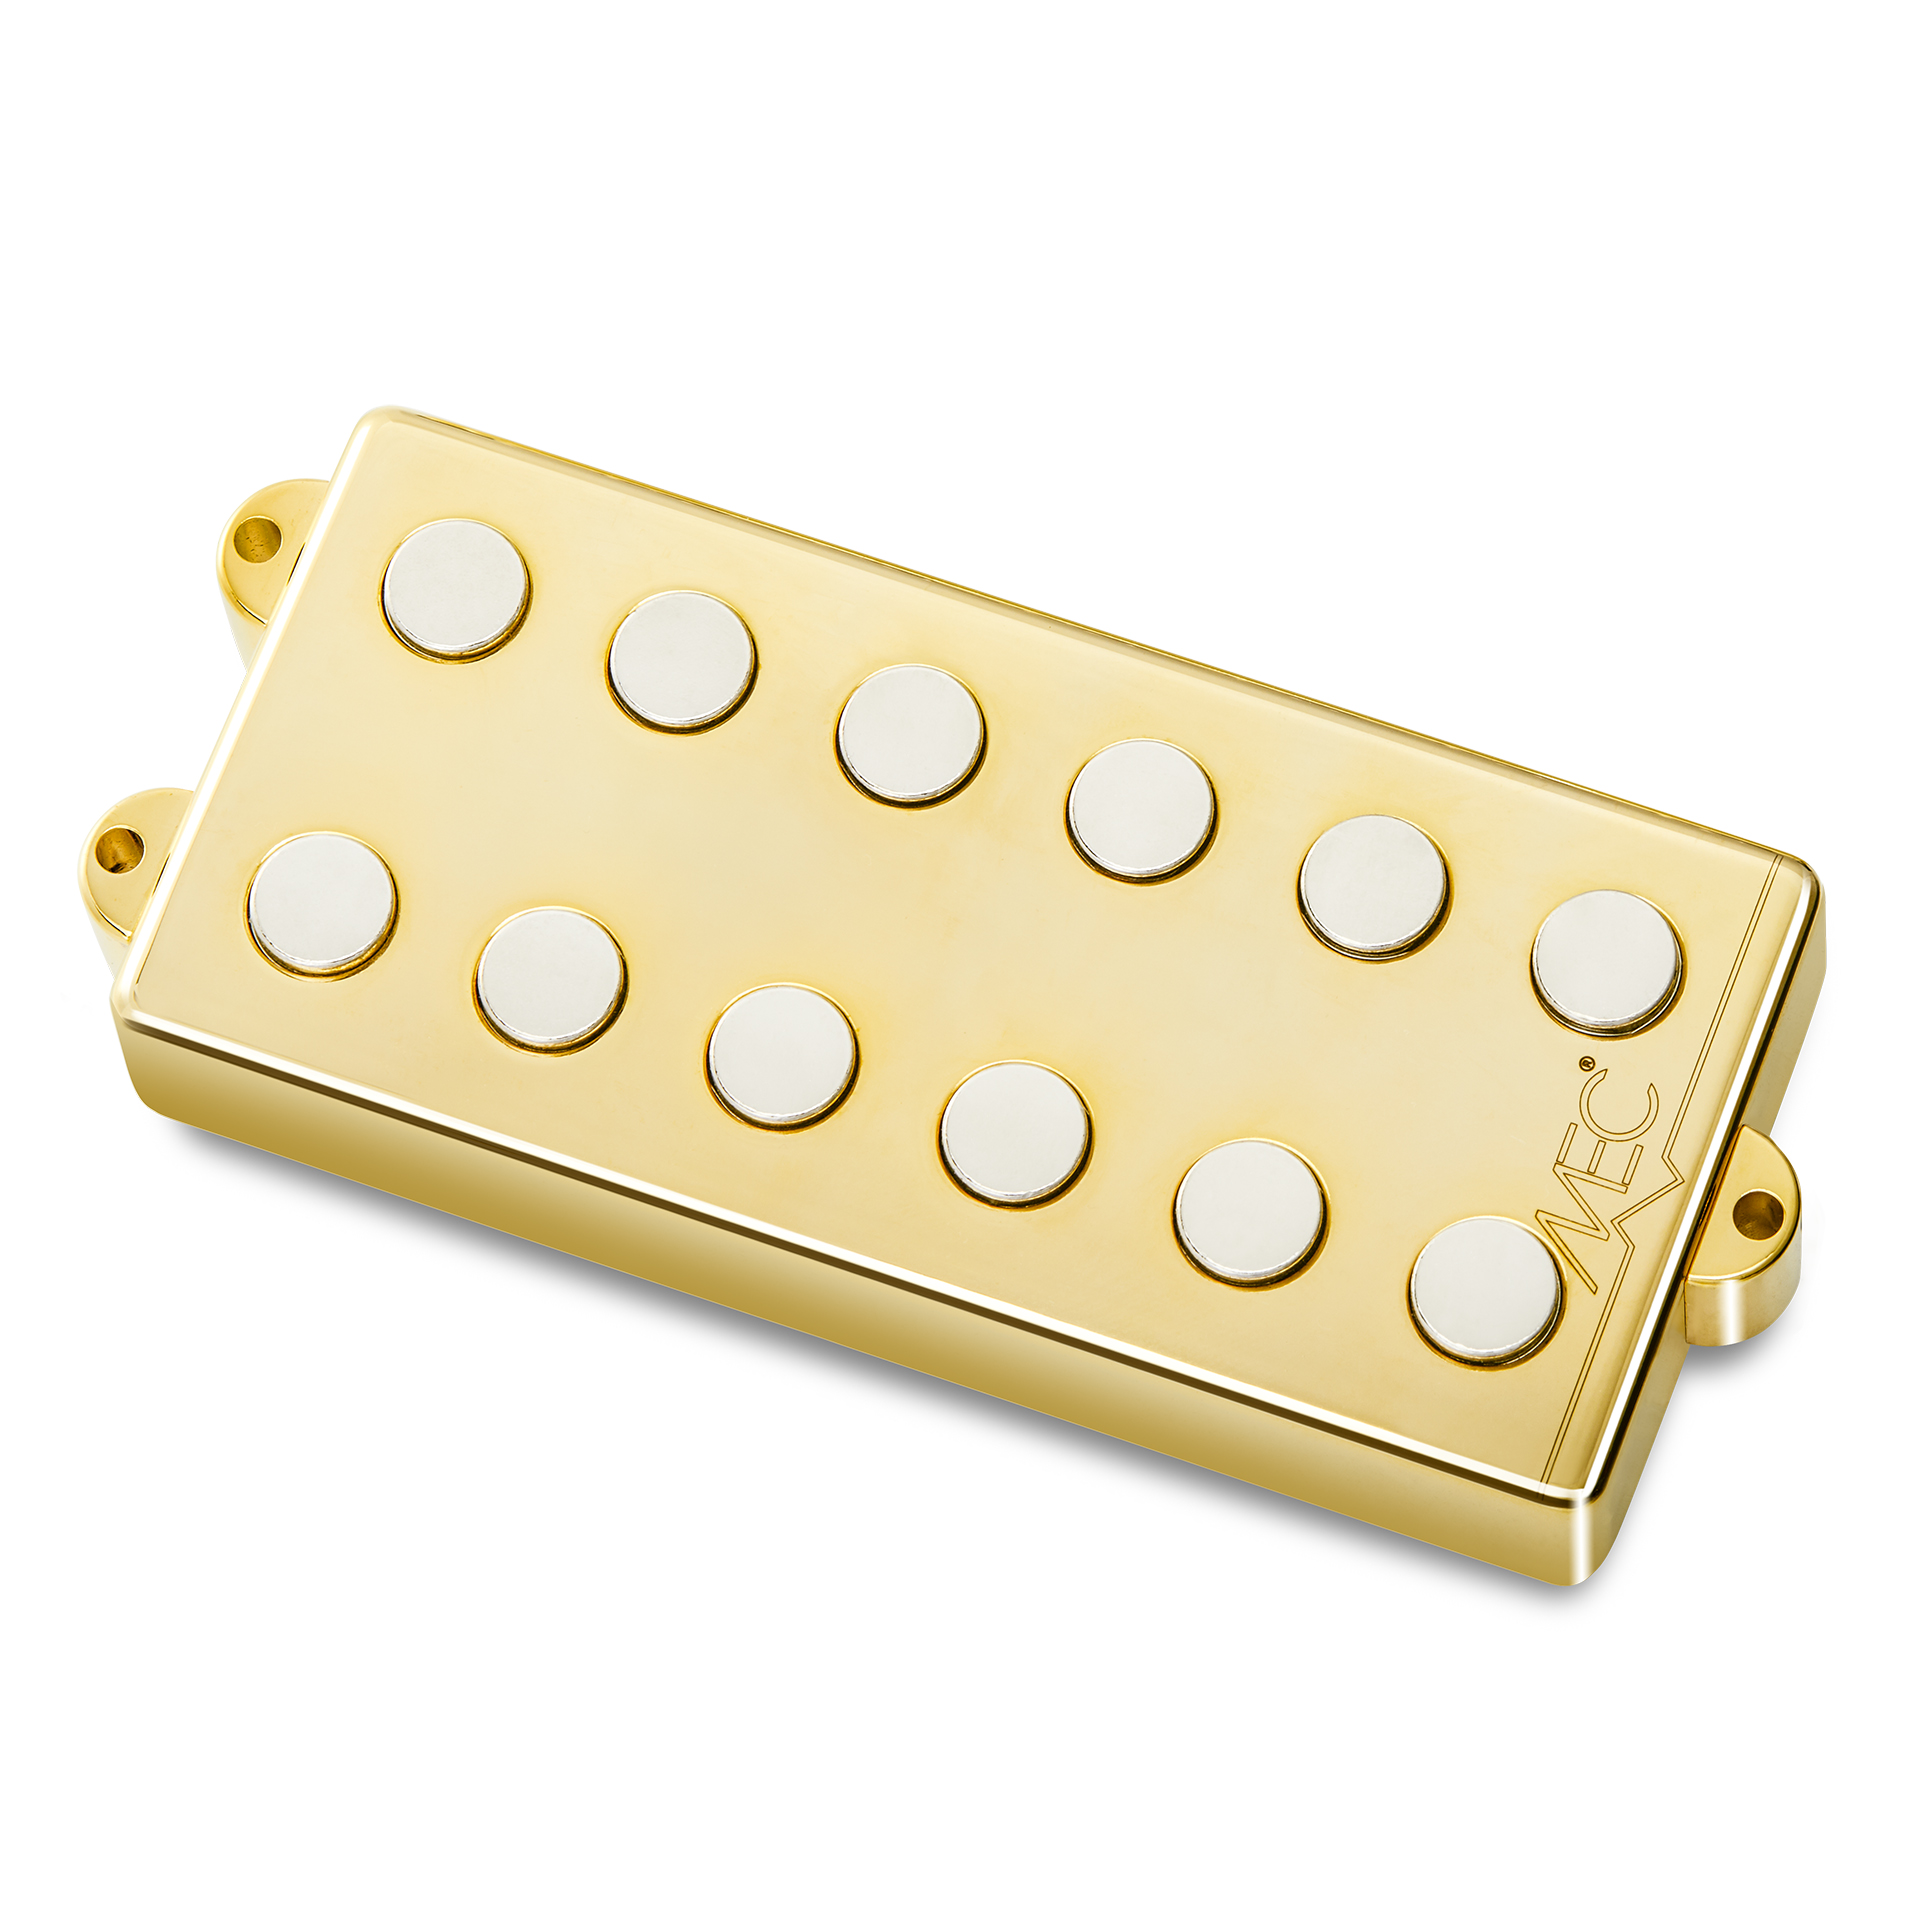 MEC Passive MM-Style Bass Pickup, Metal Cover, 6-String, Neck - Gold